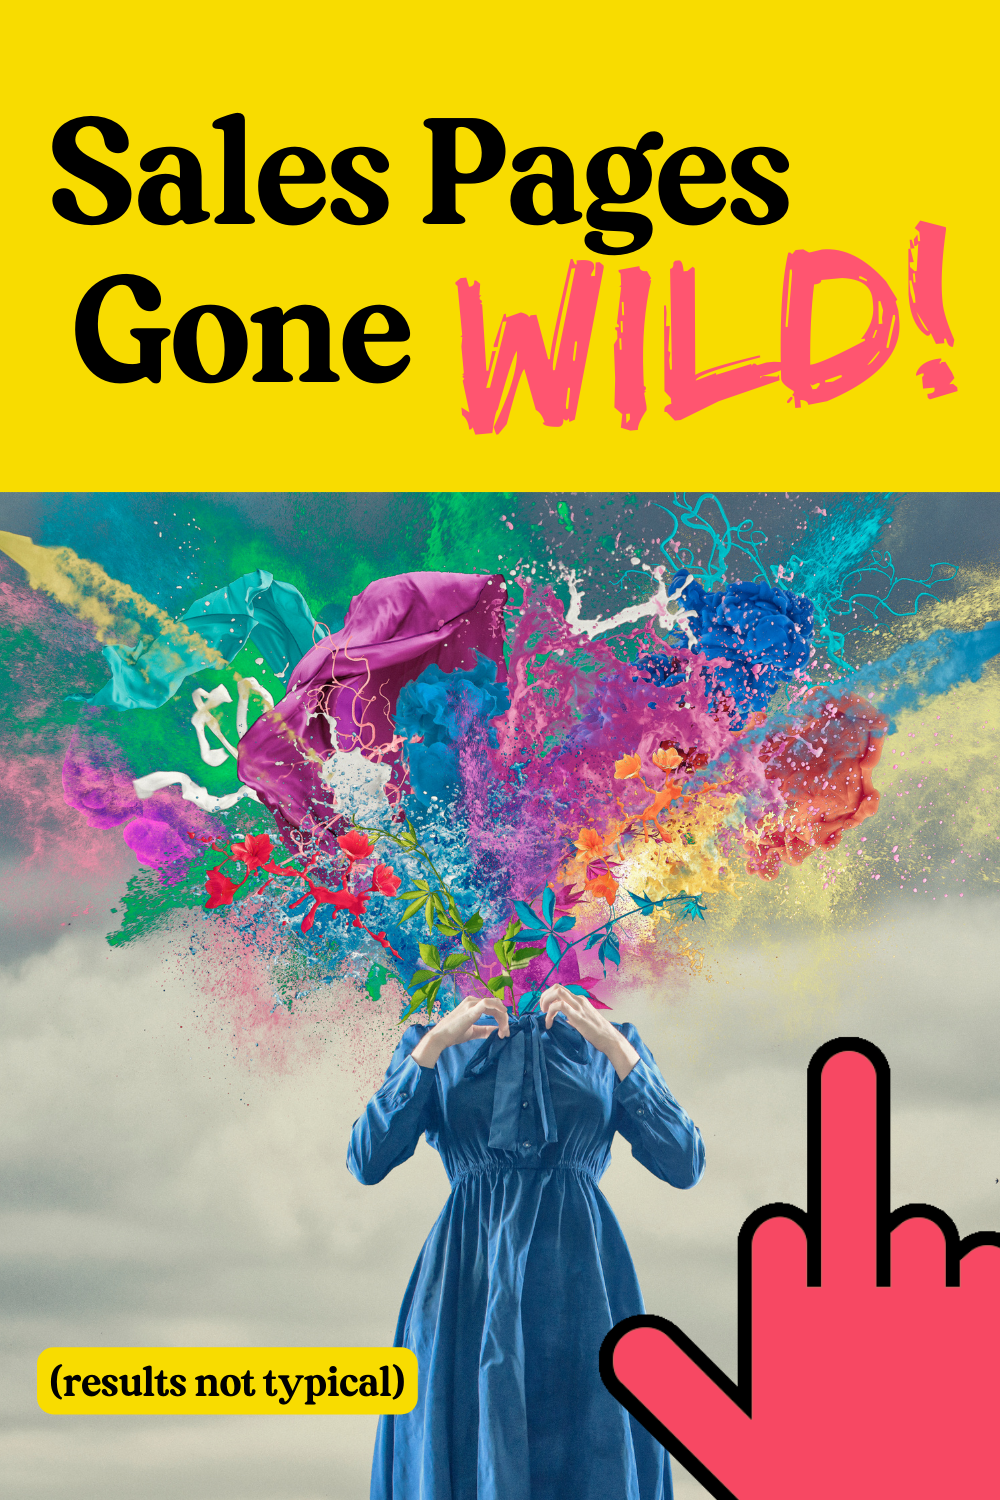 Yellow rectangle with the words "sales pages gone wild" and a photo of a women in a blue dress with a colorful explosion where her head should be. Also the words "results not typical" and a cartoon middle finger